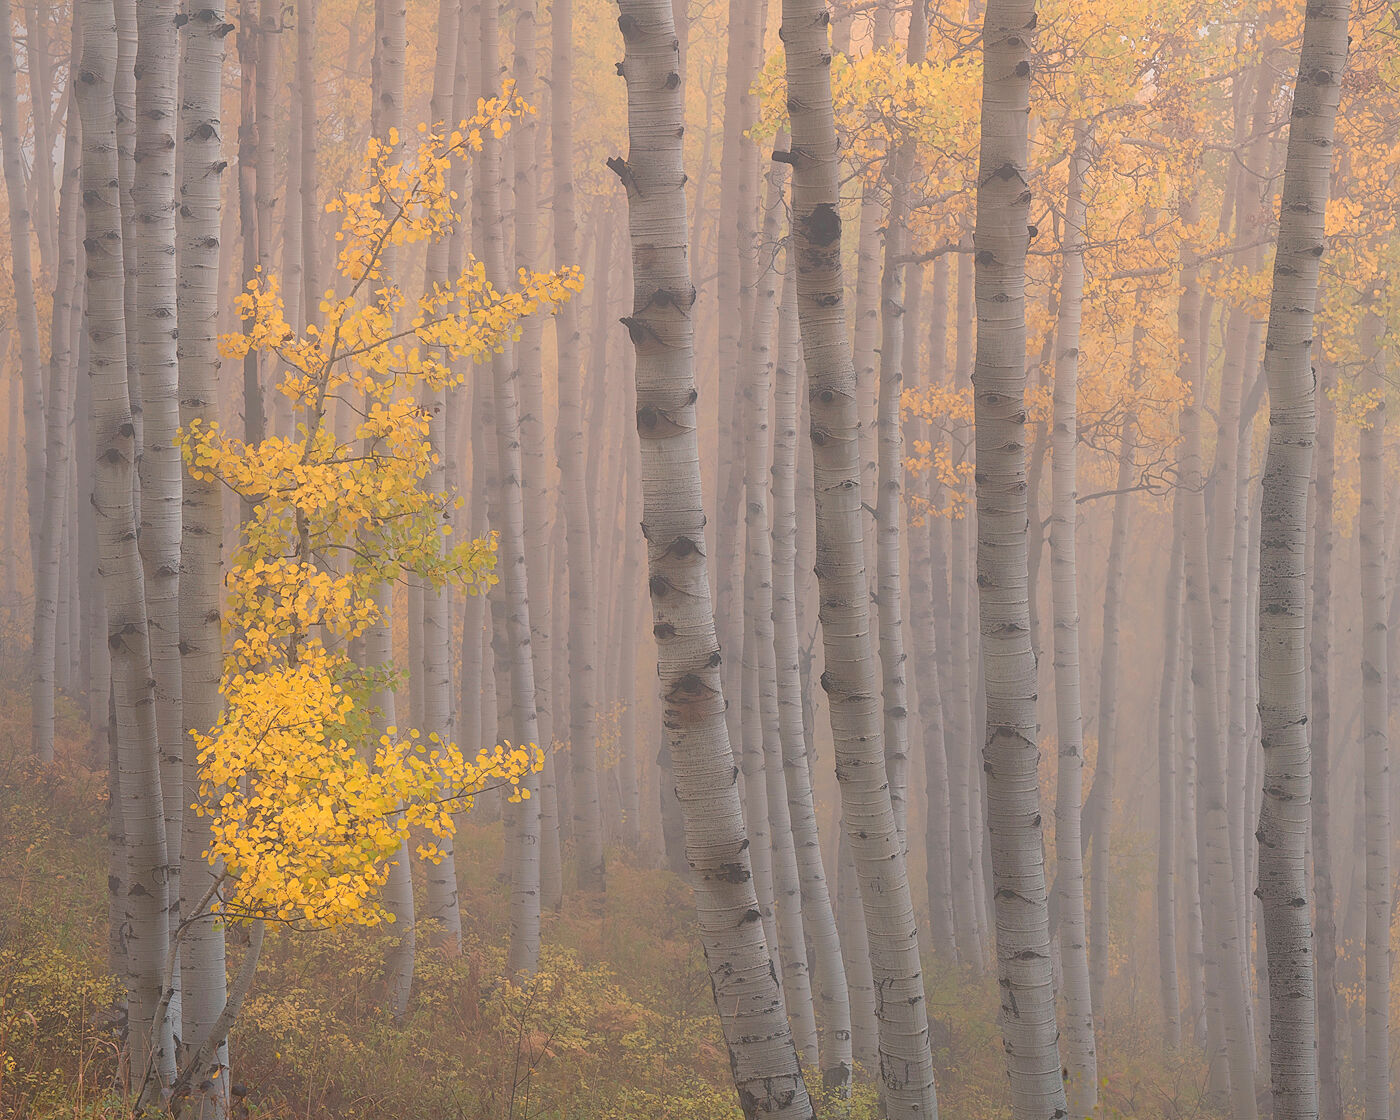 Aspen tree trunks pictured on the hillside with fog throughout the scene while a young aspen with bright yellow leaves stands in the front of the image.